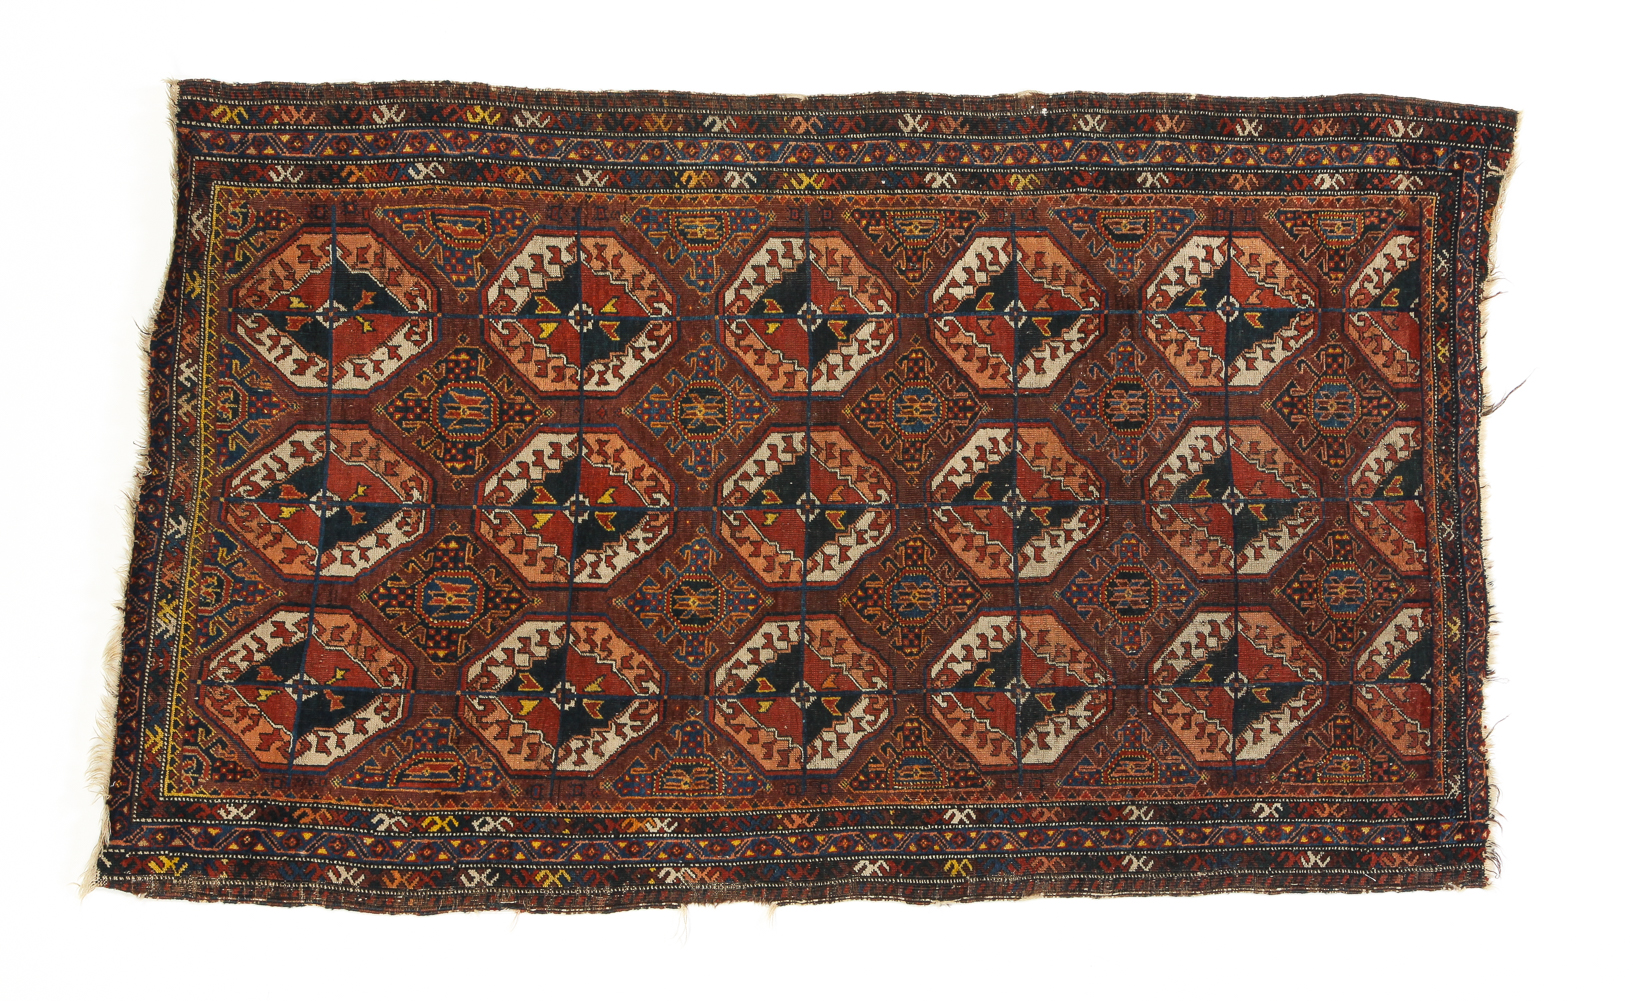 TURKMEN RUG. Late 18th-early 19th